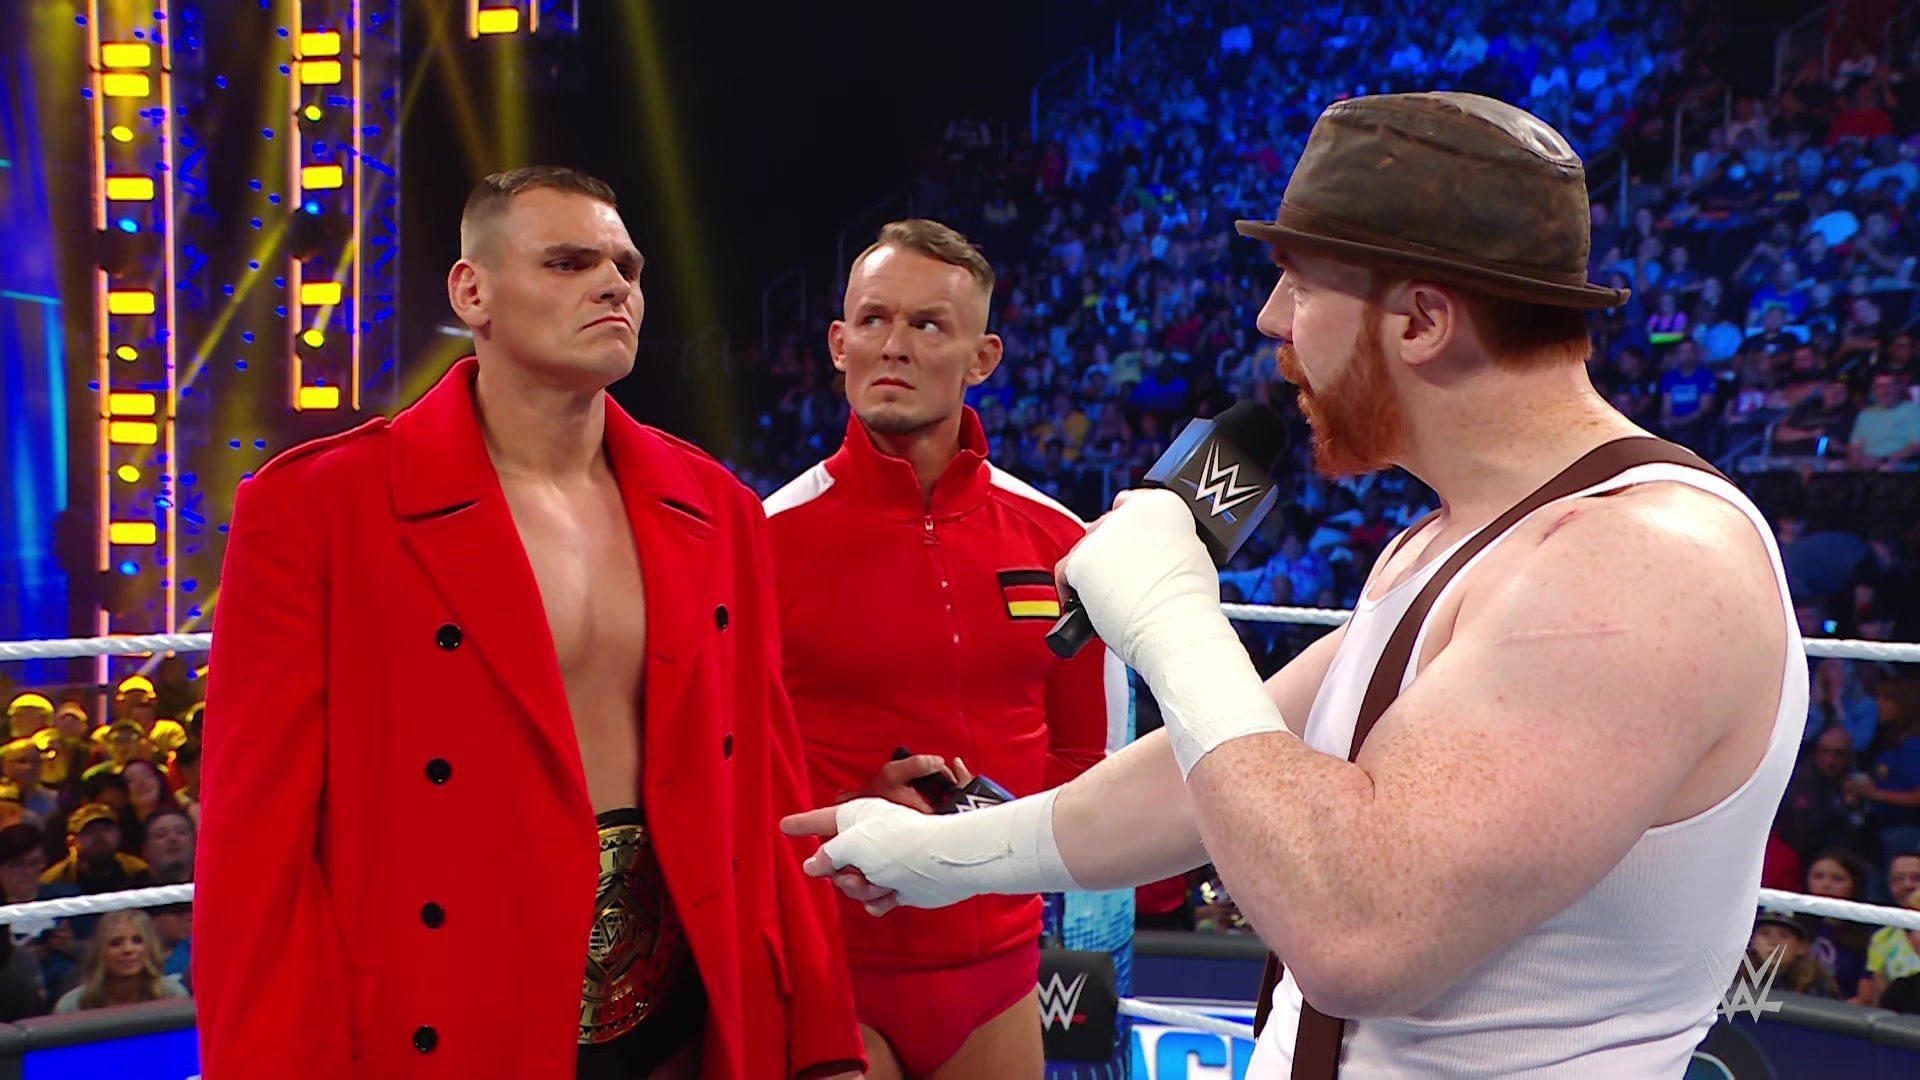 Gunther, Ludwig Kaiser, and Sheamus